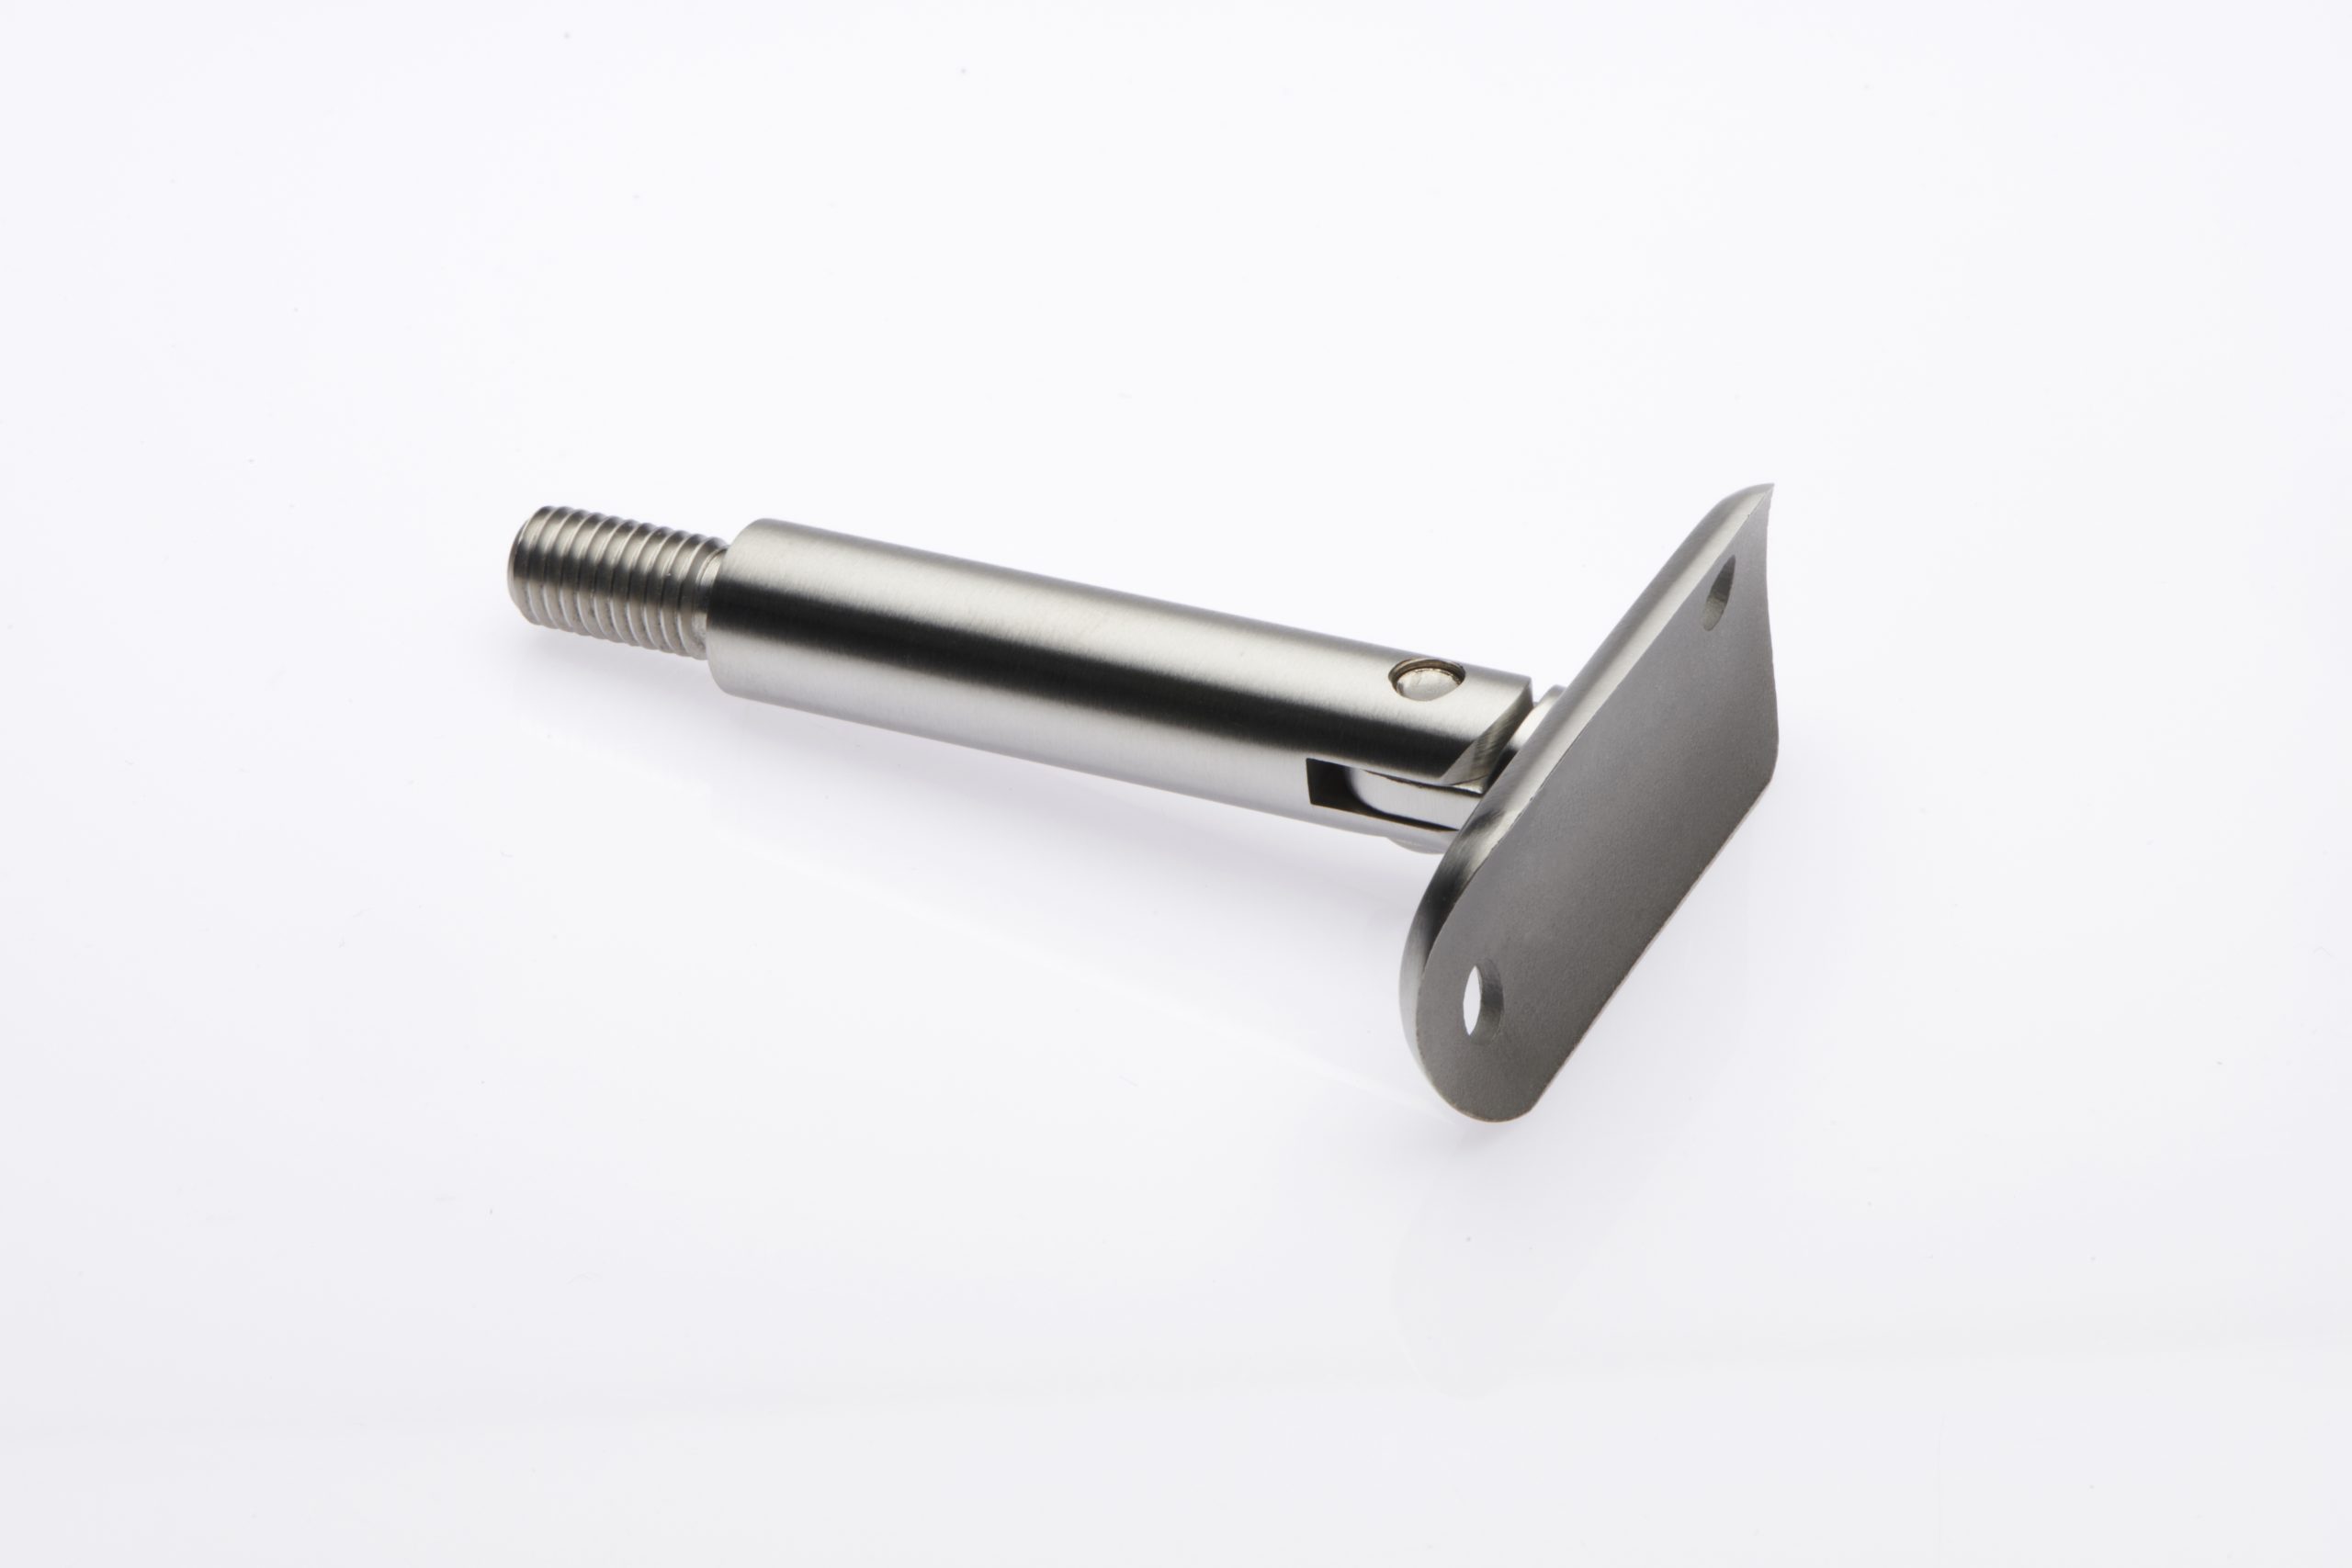 Handrail Stem With Thread - Adjustable Saddle for 42.4mm Handrail